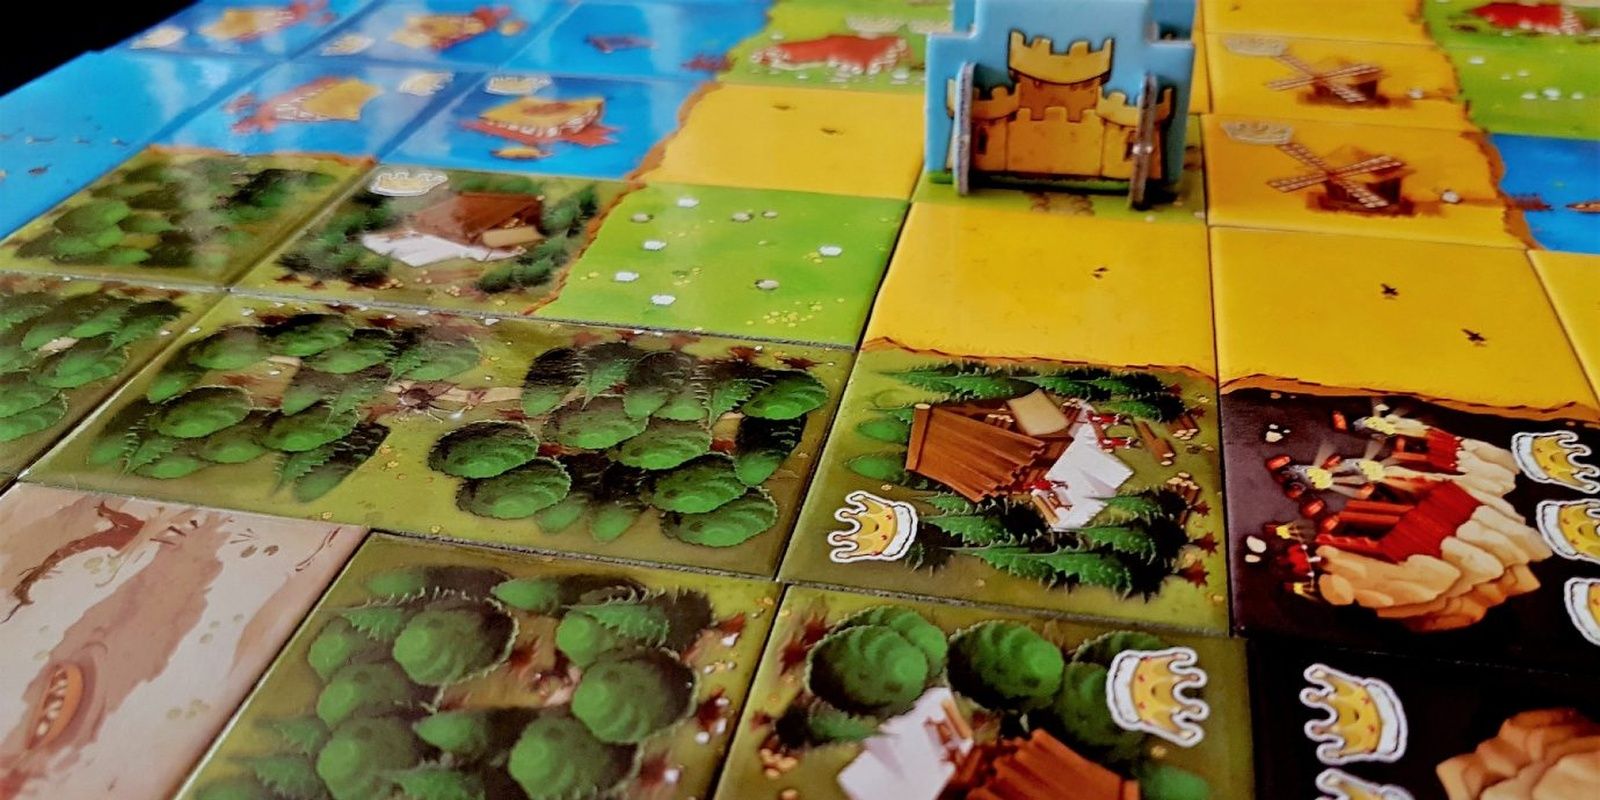 Kingdomino Board Game Being Played On Table